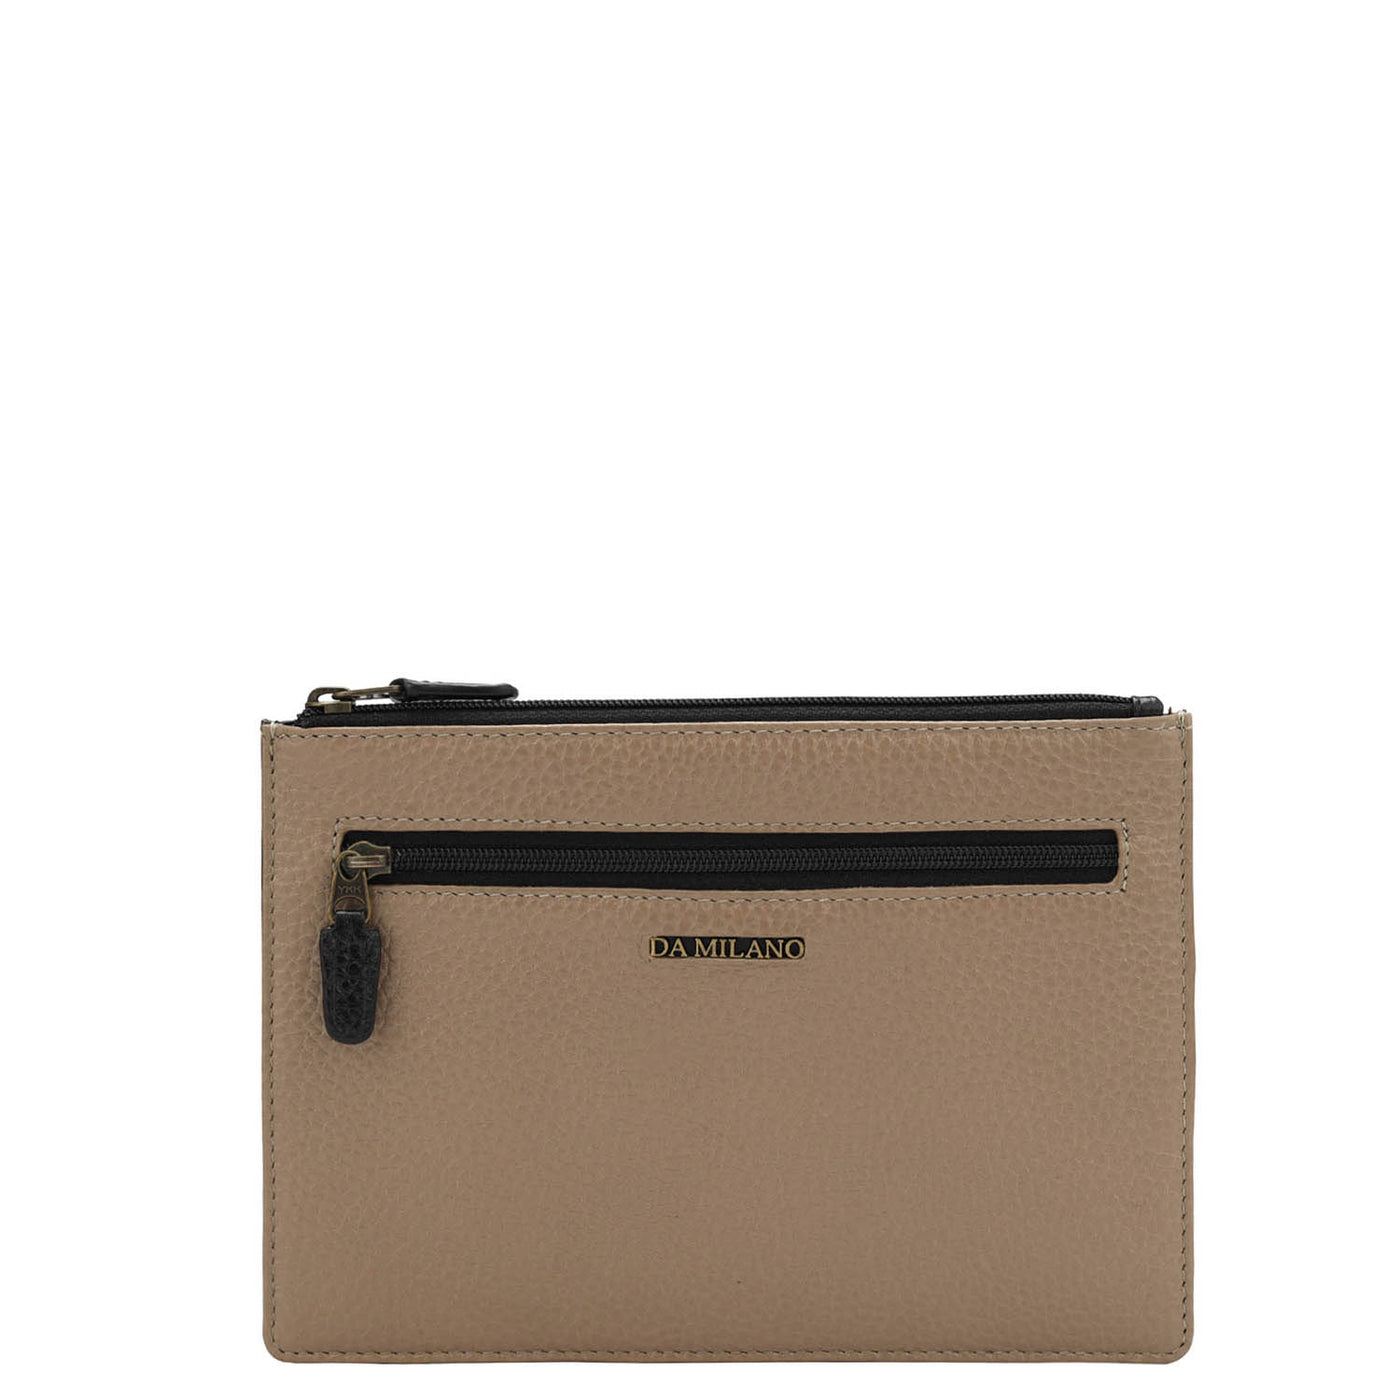 Wax Leather Pouch - Taupe & Black